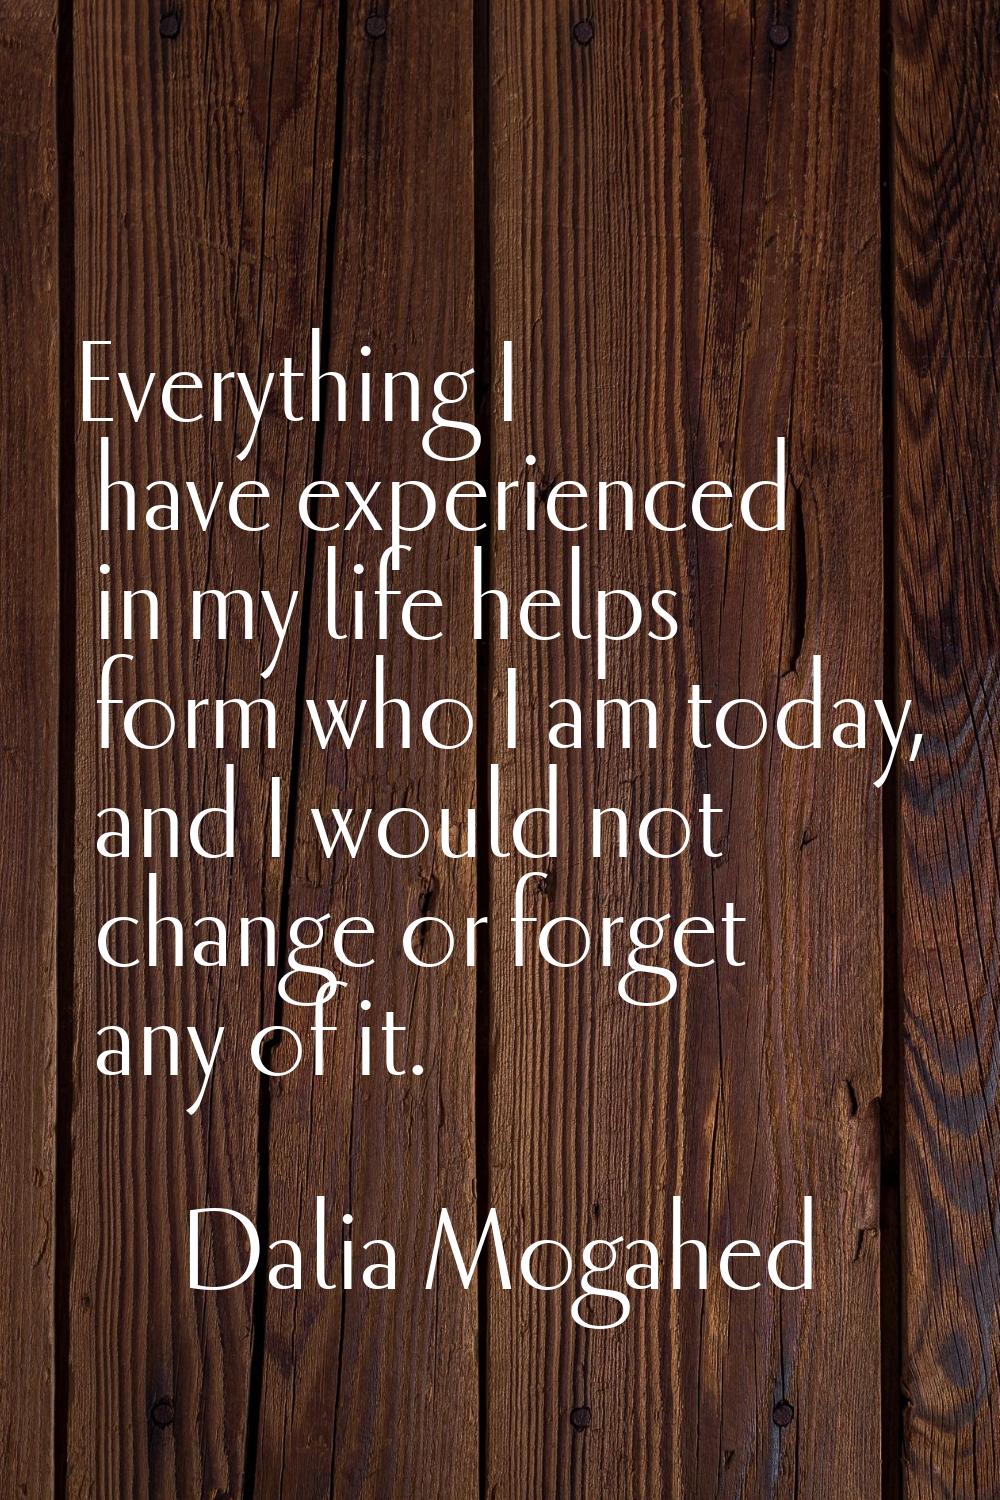 Everything I have experienced in my life helps form who I am today, and I would not change or forge